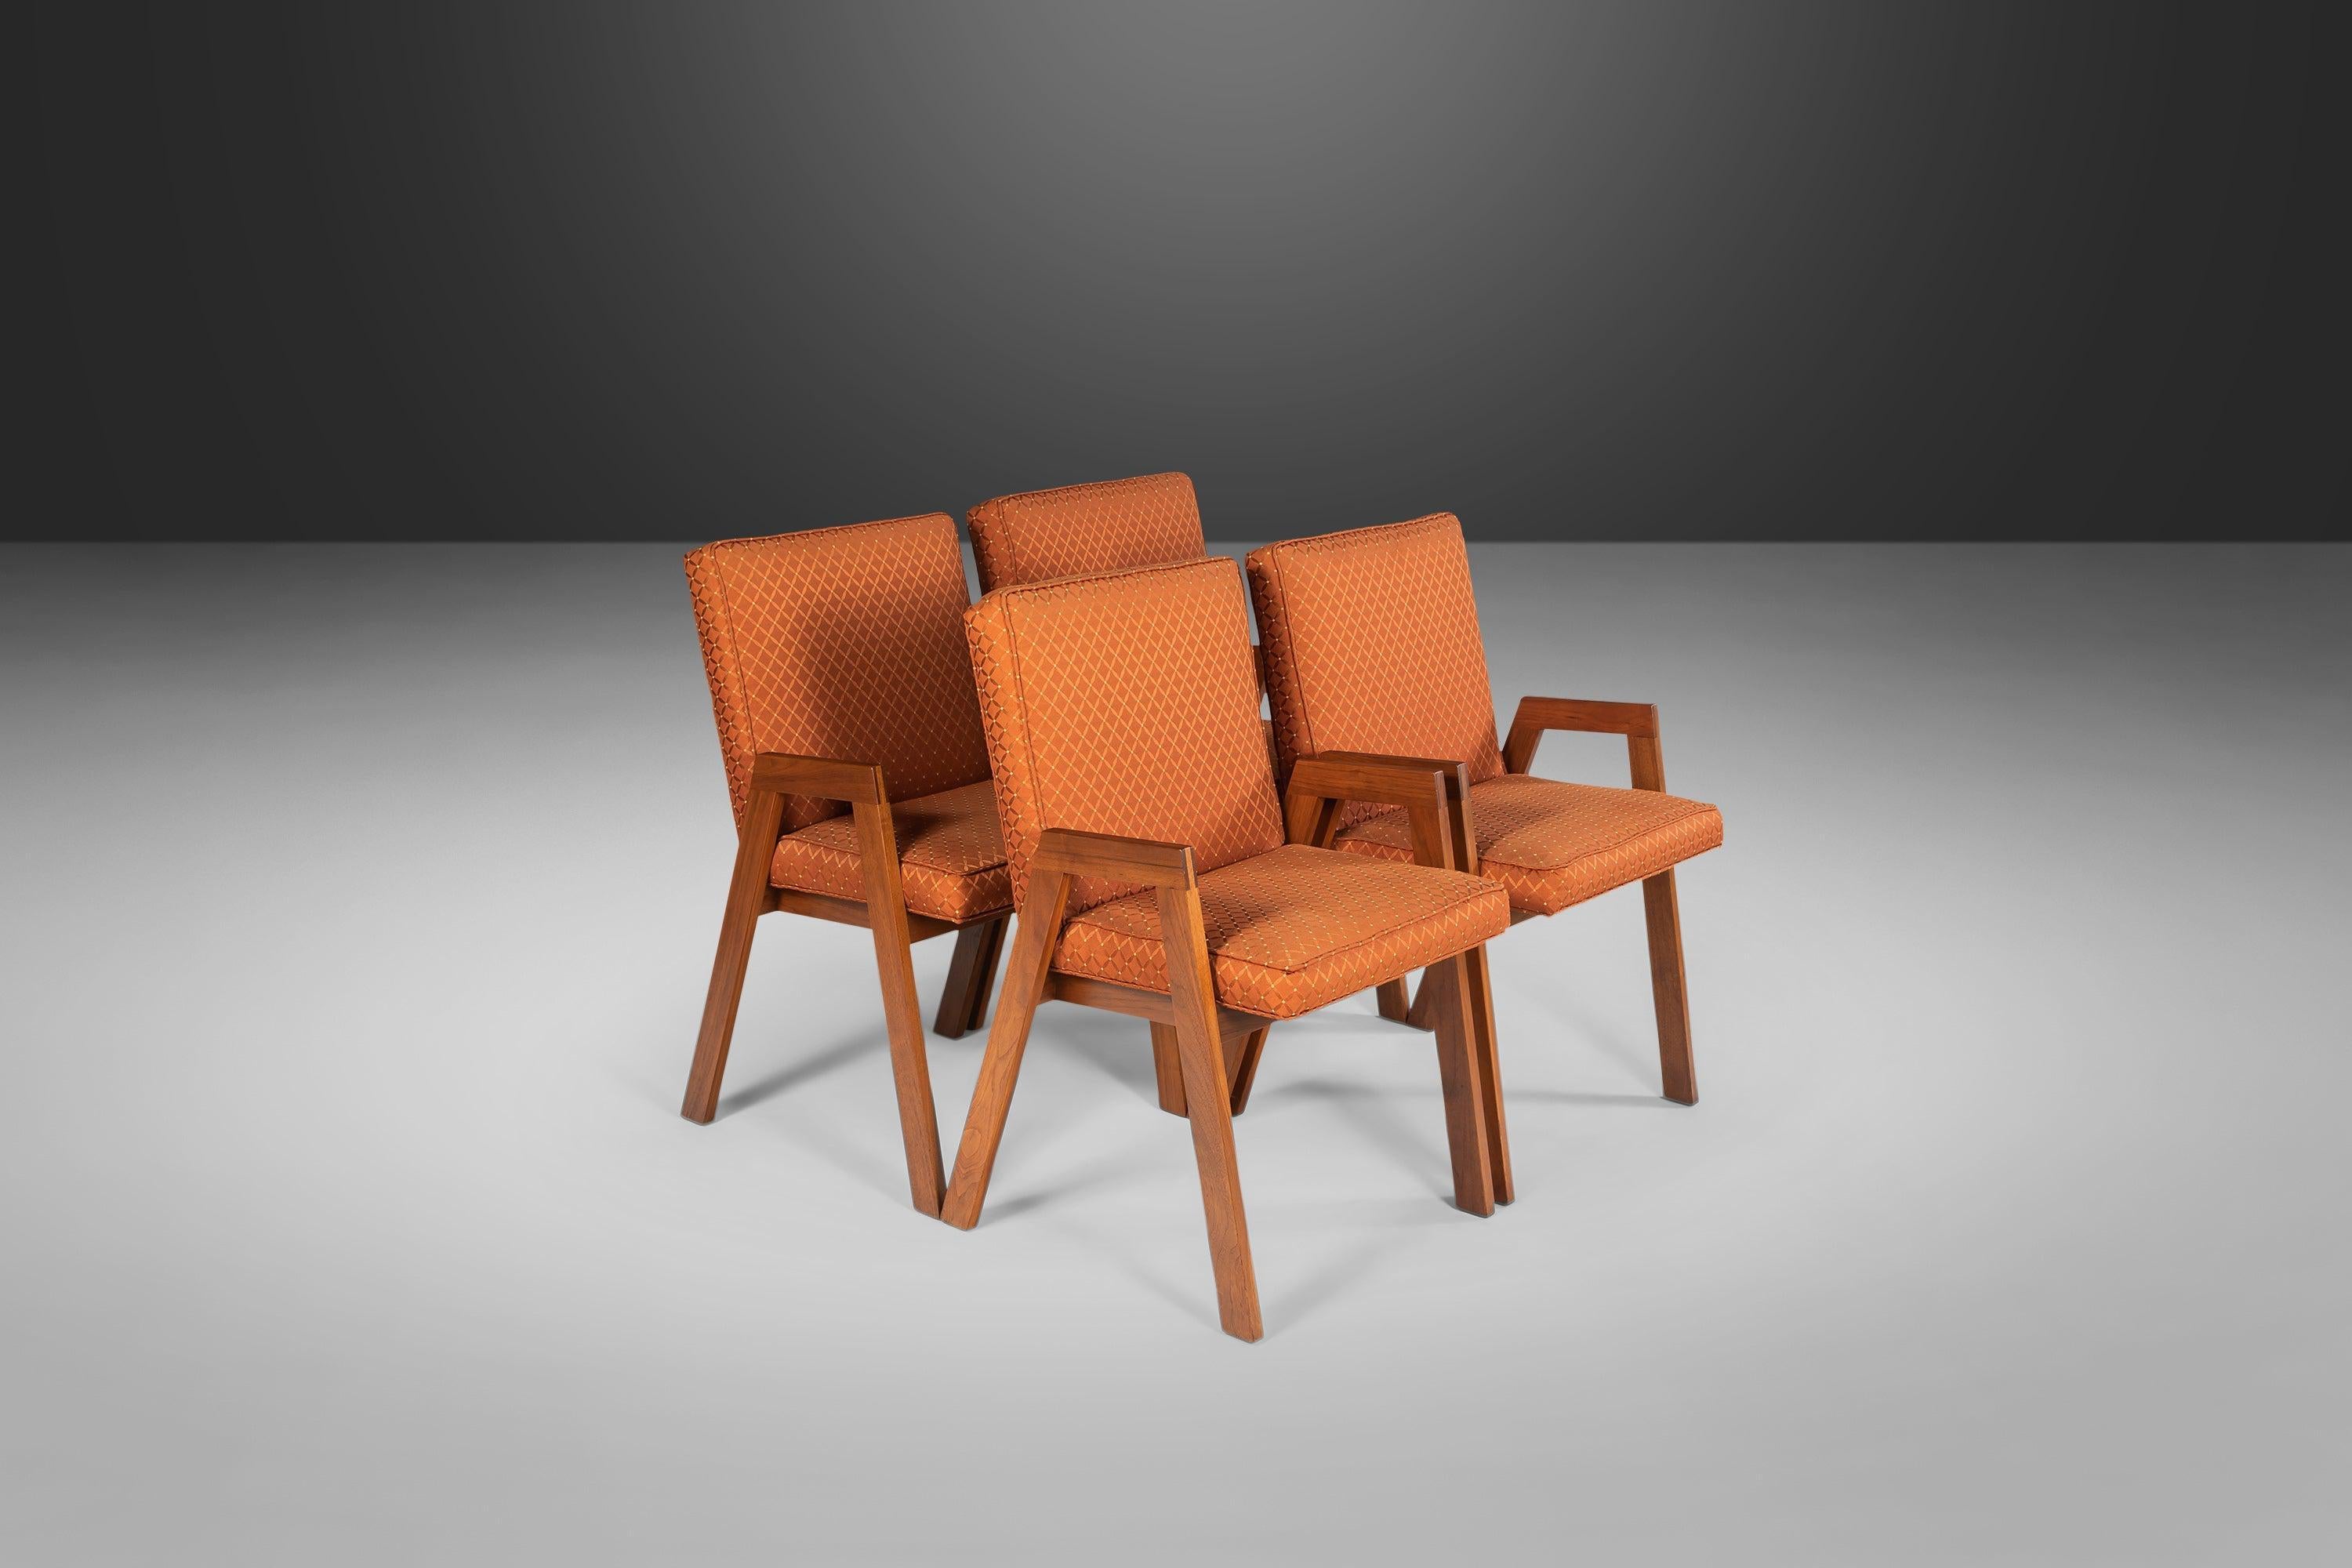 Minimal and angular. Constructed from walnut and found in a period orange upholstery. Circa 1960s.

---Dimensions---

Width: 21 in / 53.34 cm
Depth: 23 in / 58.42 cm
Height: 33.5 in / 85.09 cm
Seat Height: 19 in / 48.26 cm
Arm Height: 23.5 in /